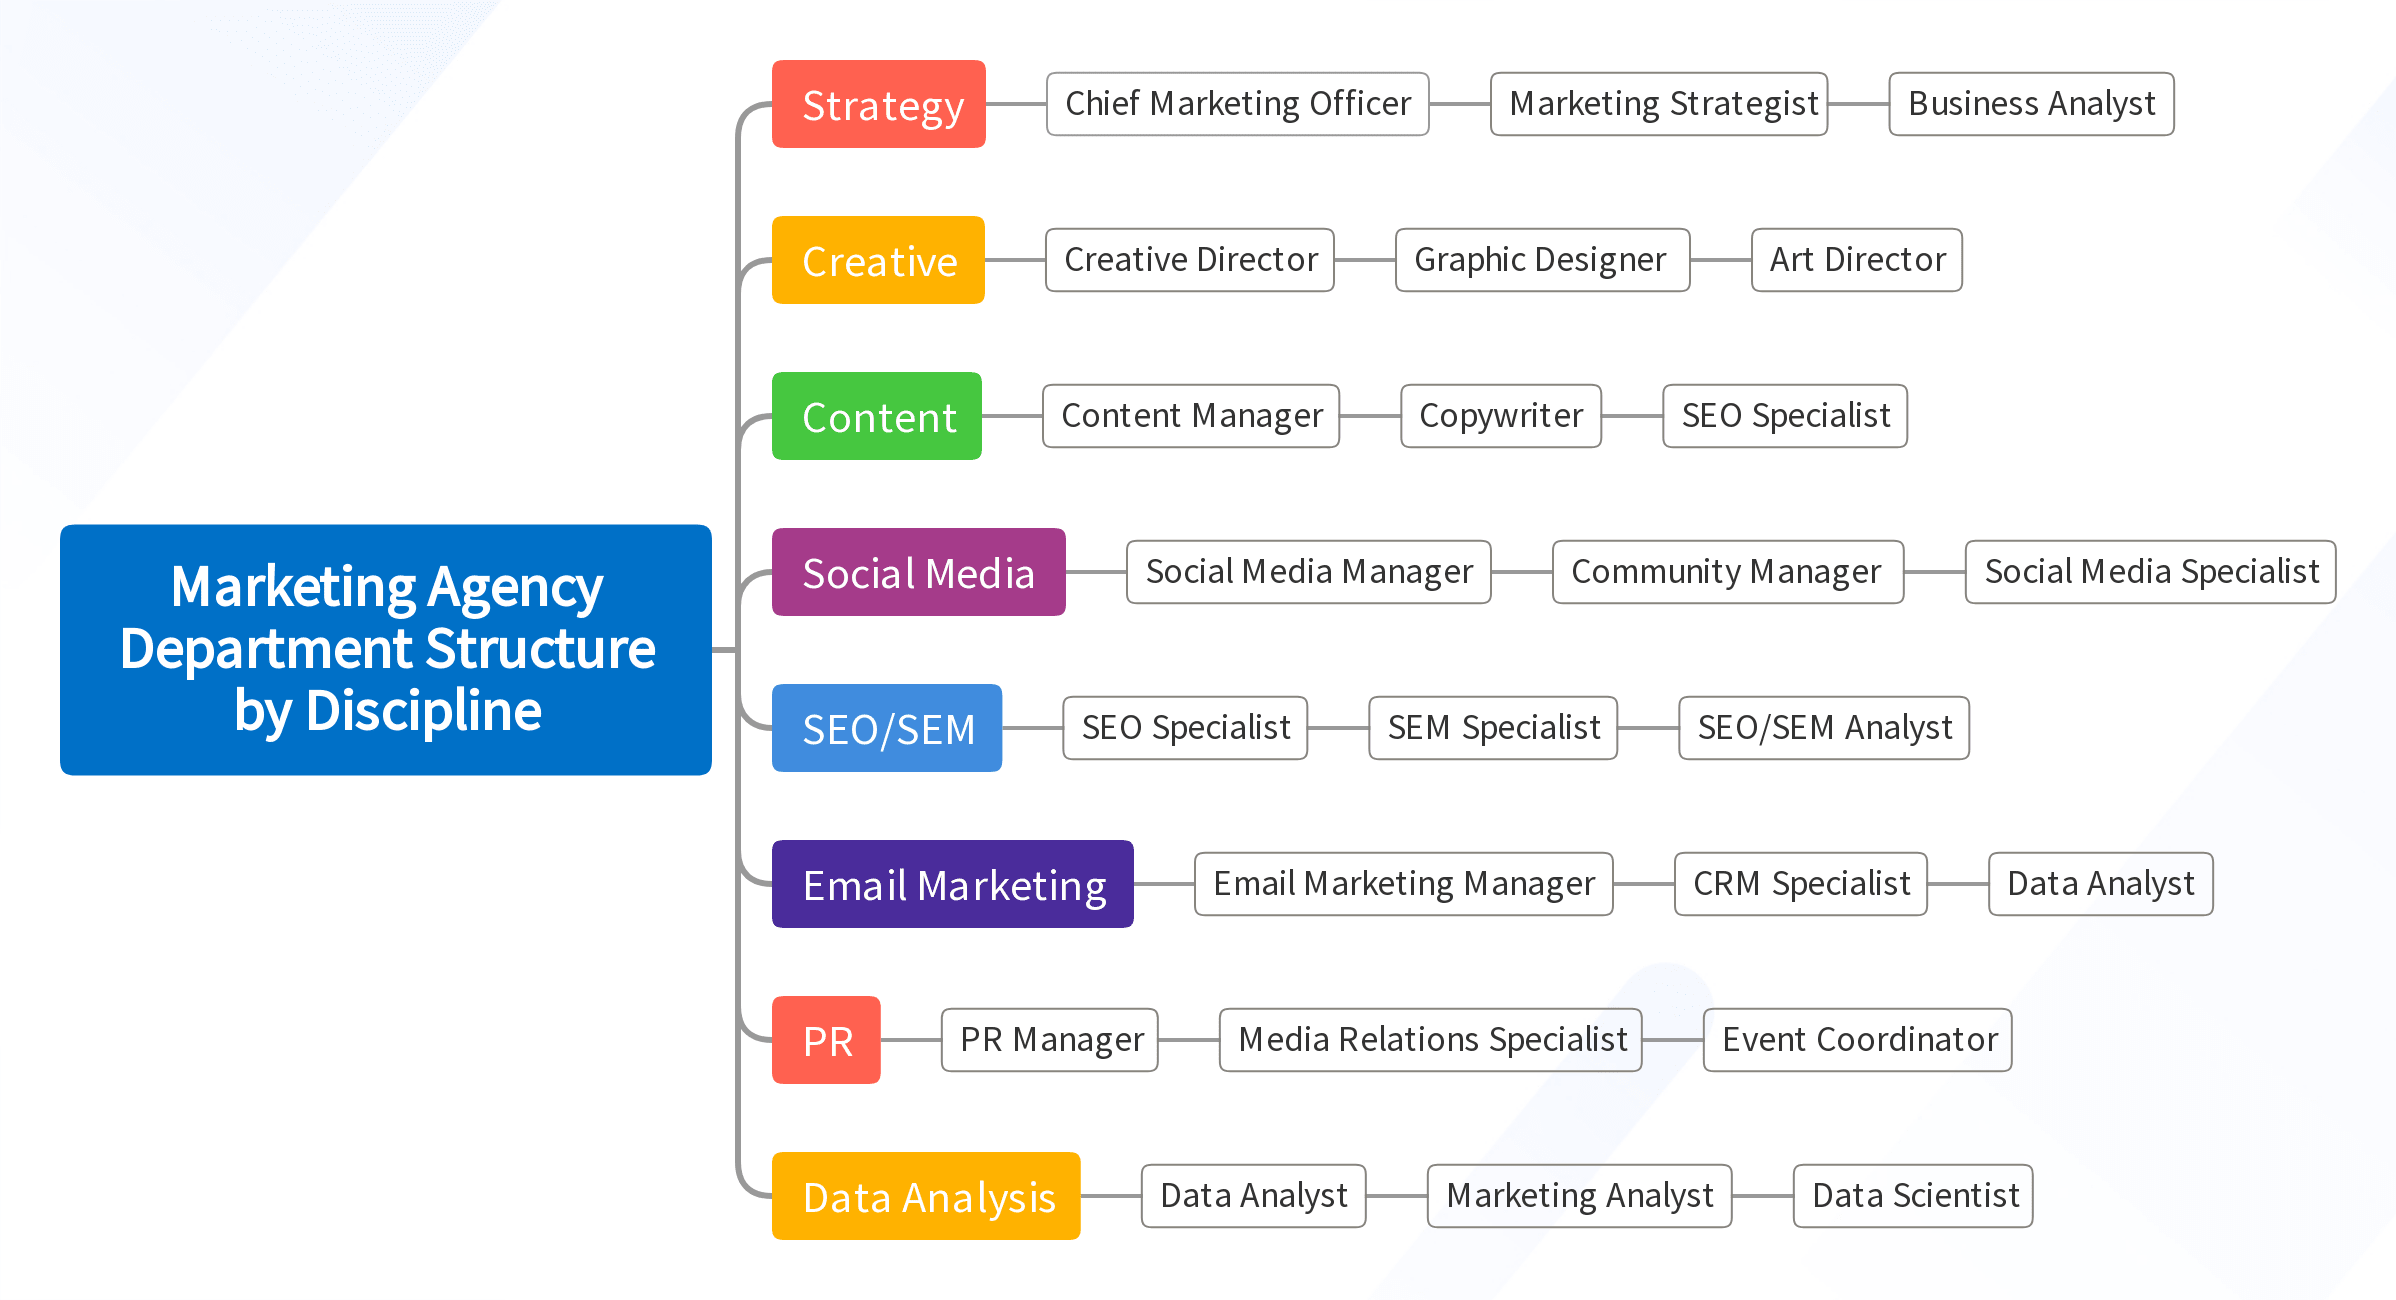 Marketing Agency Department Structure by Discipline